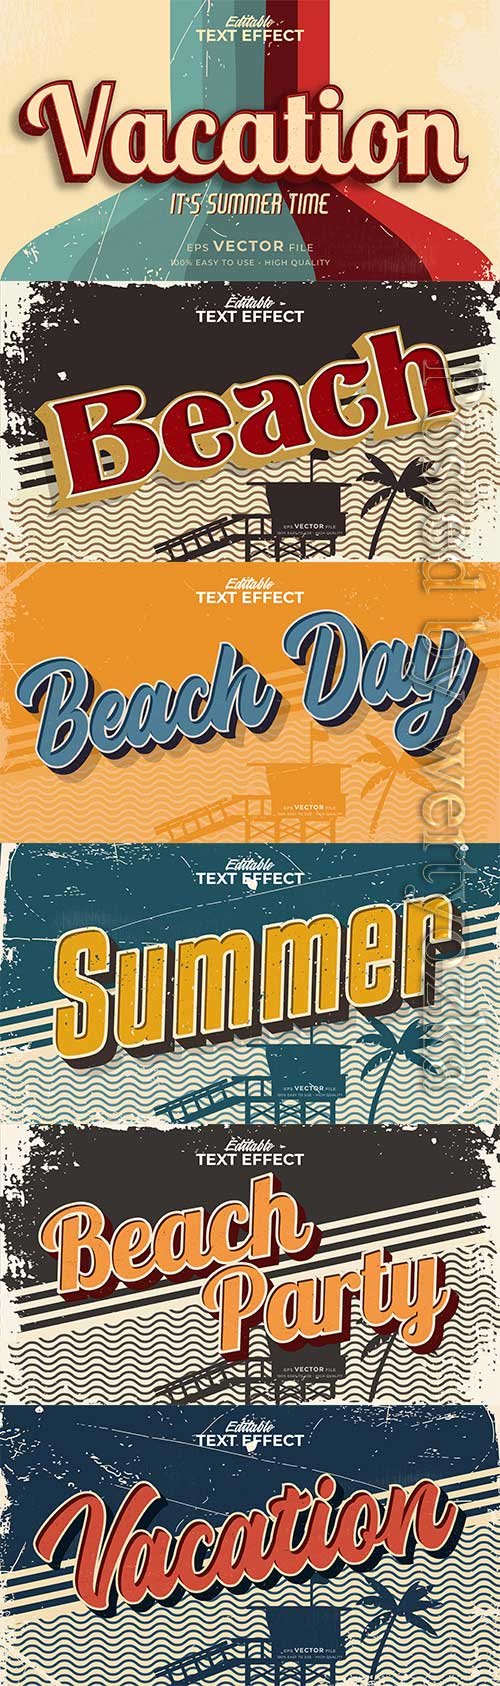 Retro summer holiday text in grunge style theme in vector vol 8